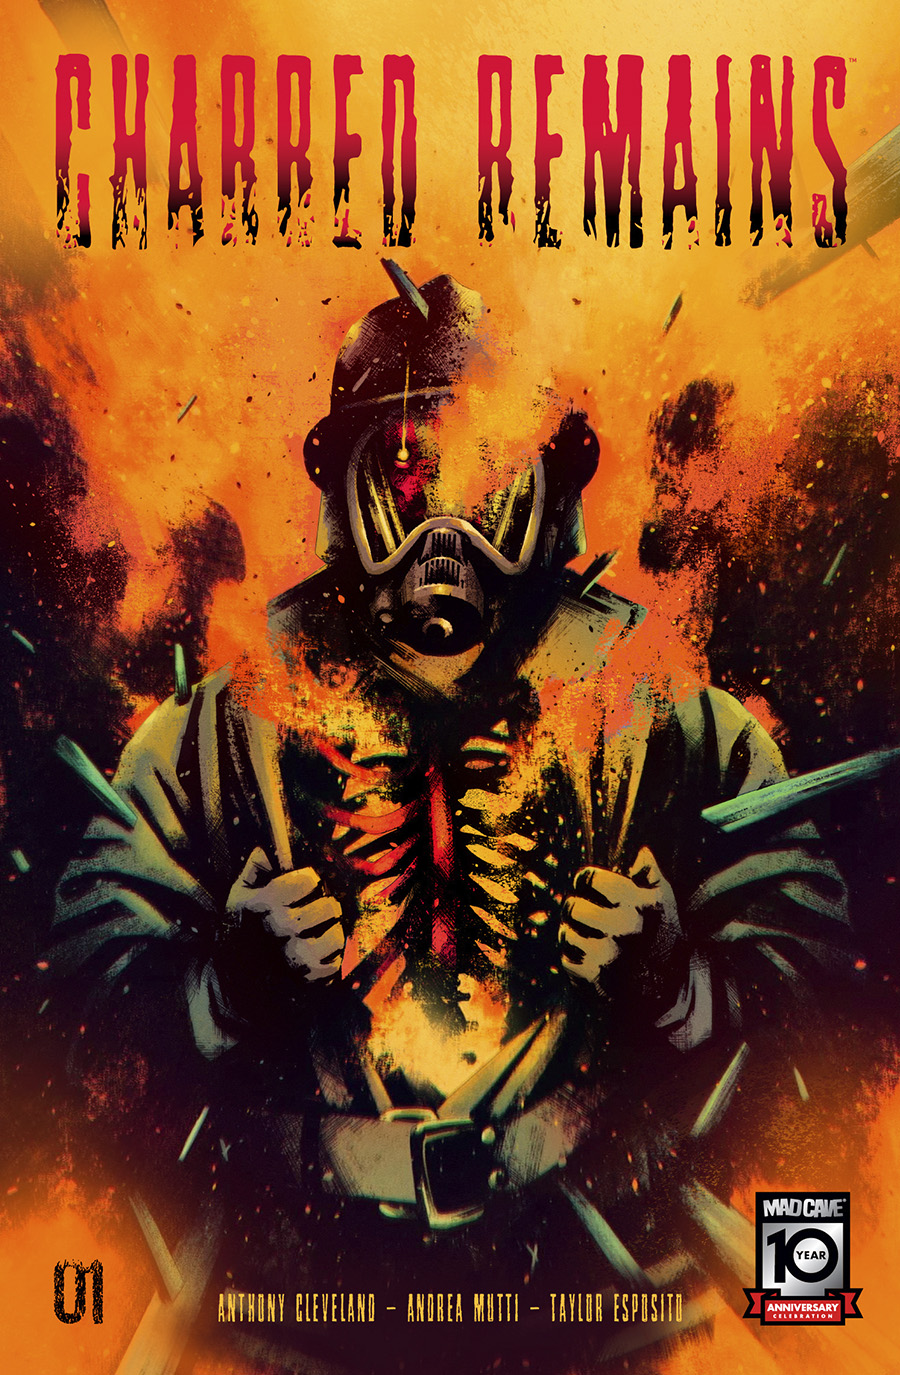 This image is the cover for the book Charred Remains #1, Charred Remains